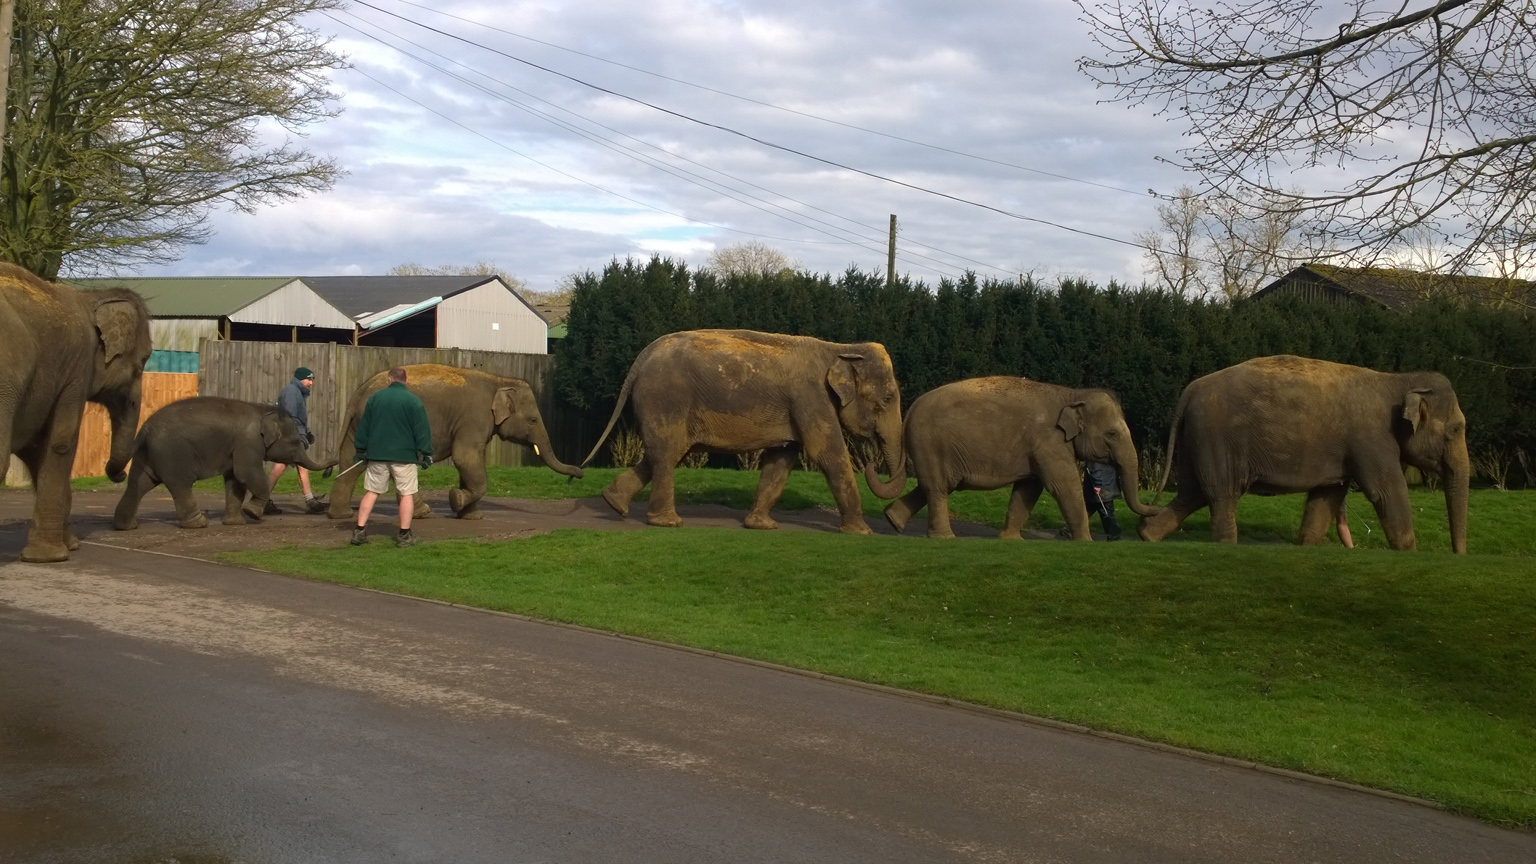 Never seen a bunch of elephants taken for a walk through the zoo before!